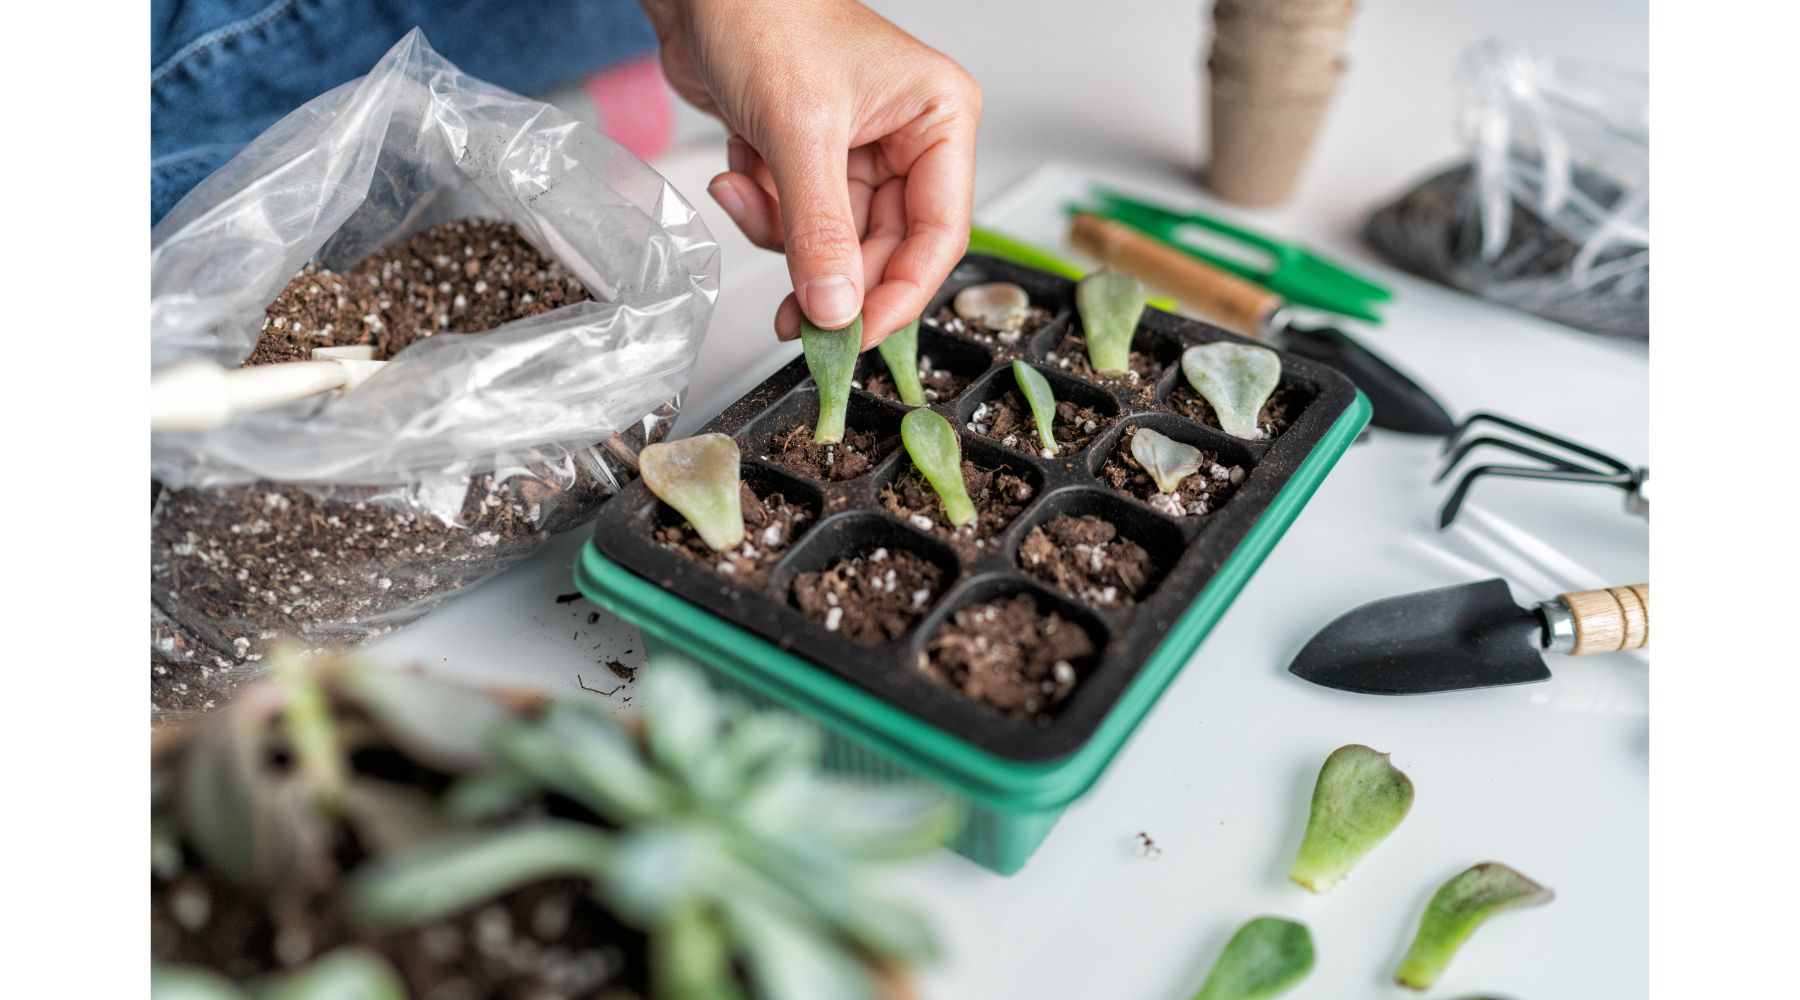 succulent-leaf-propagation-diy-woman-gardening-at-home-planting-plant-leaves-in-potting-mix-propagator-tray-for-sprouting-indoor-garden-in-apartment